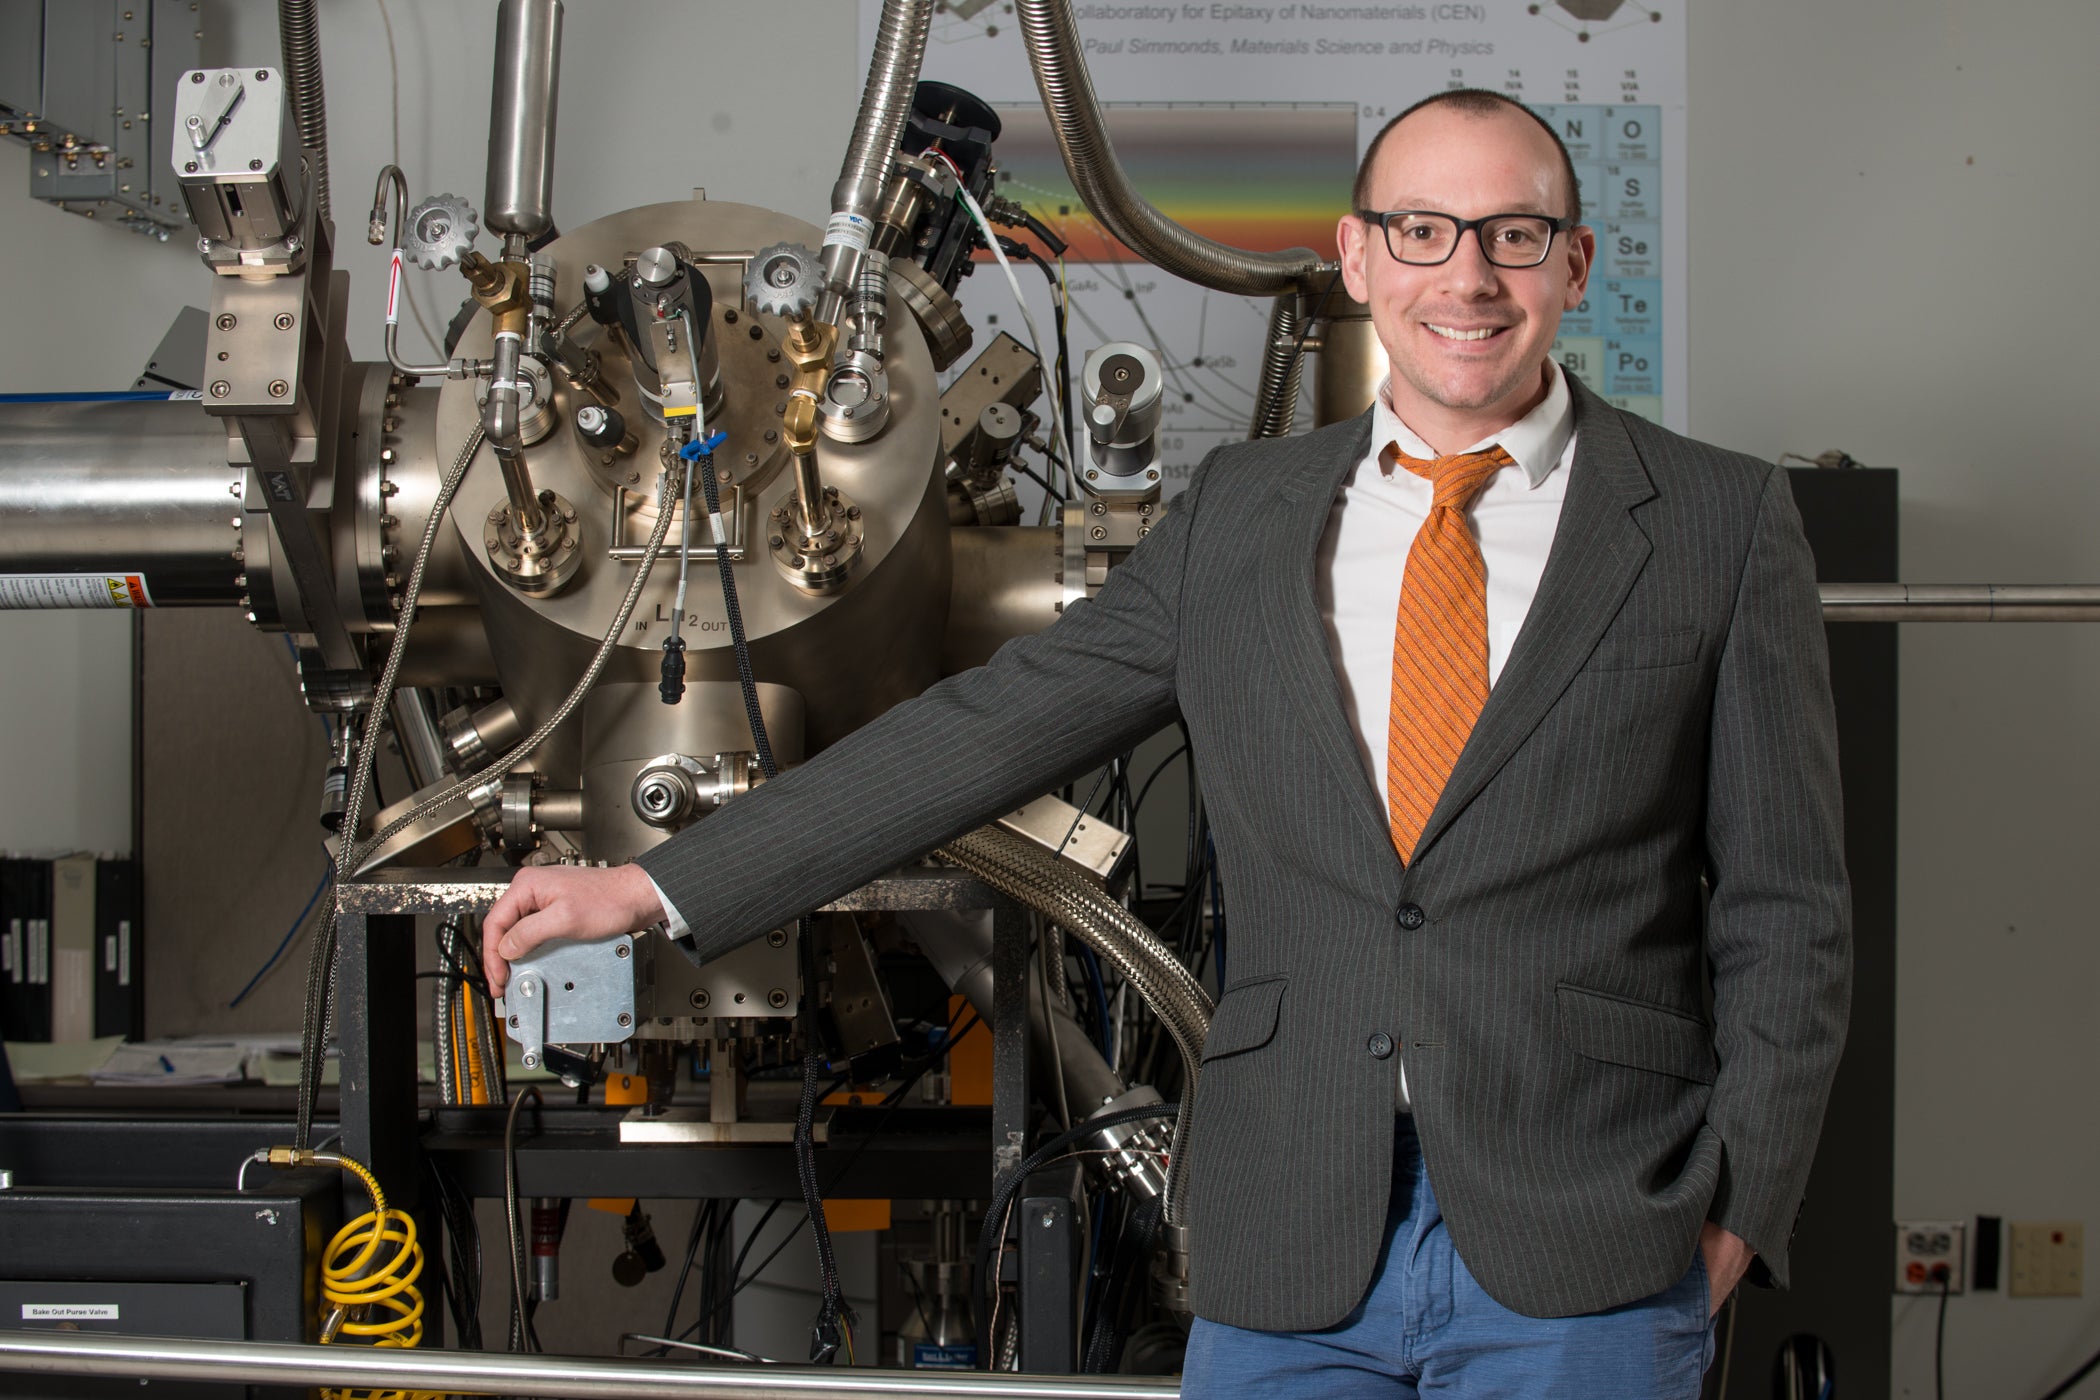 Photo of Simonds standing in front of Molecular Beam Epitaxy apparatus